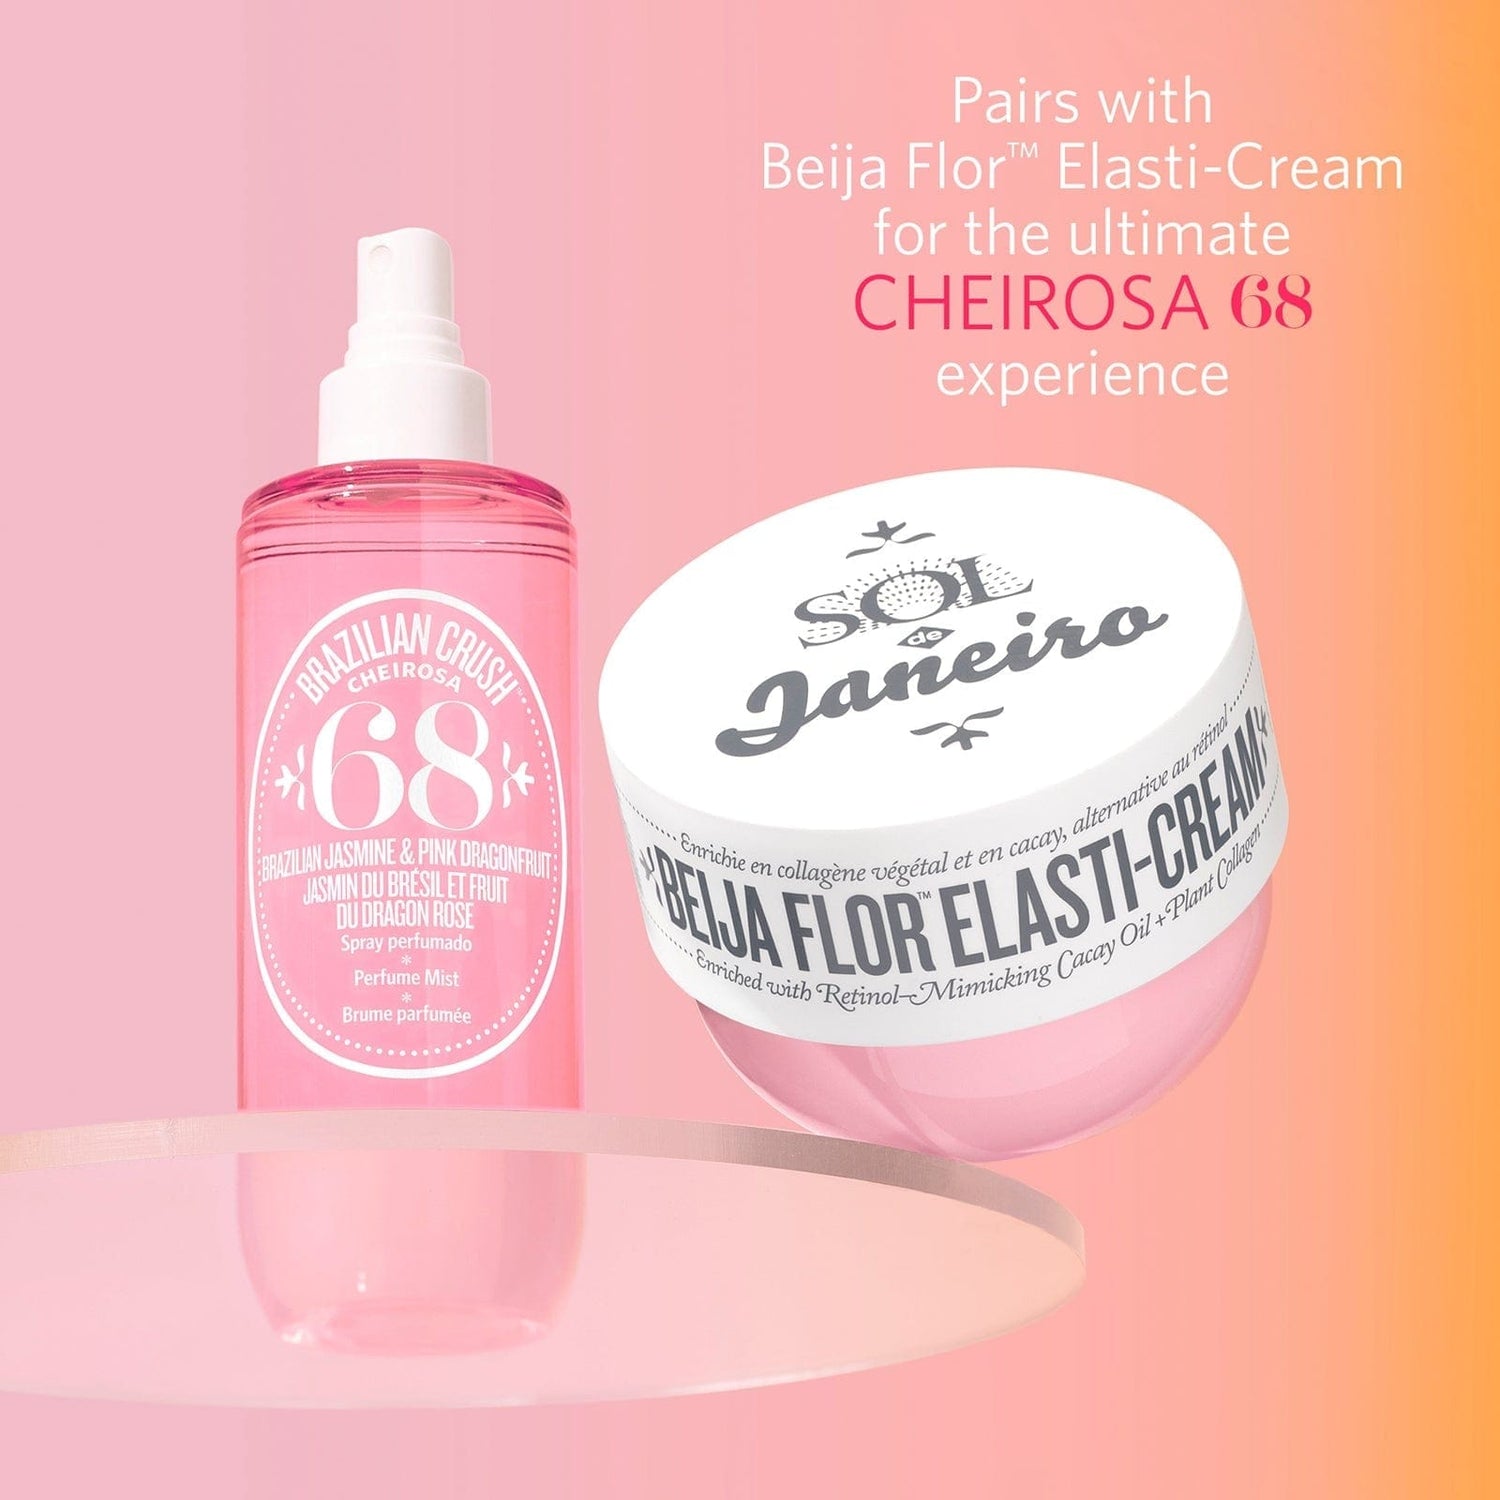 Pairs with Beija Flor Elasti-Cream for the ultimate cheirosa 68 experience